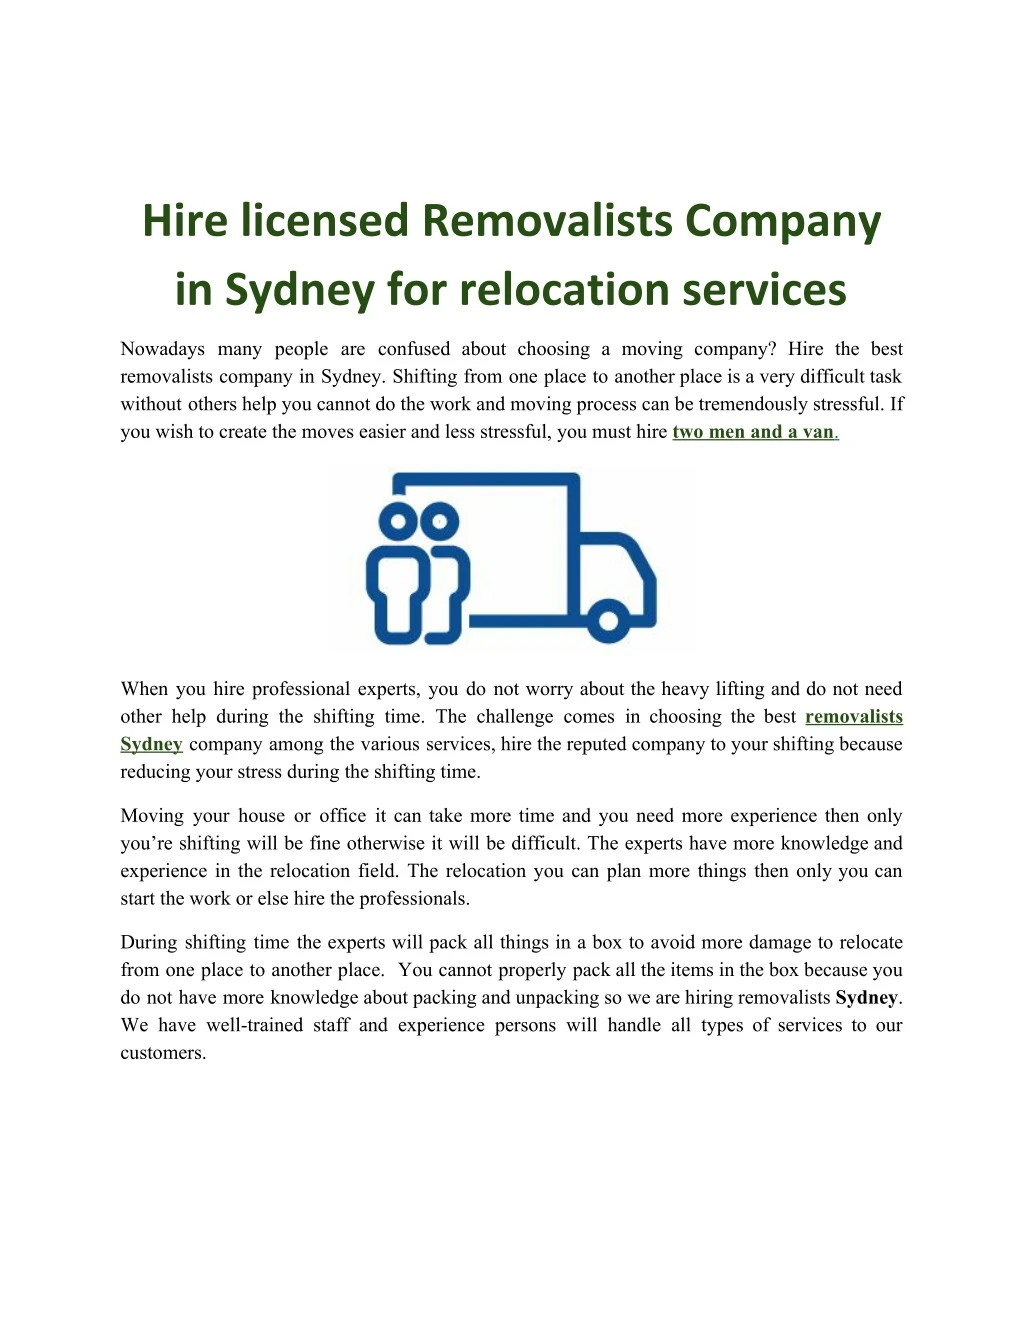 hire licensed removalists company in sydney